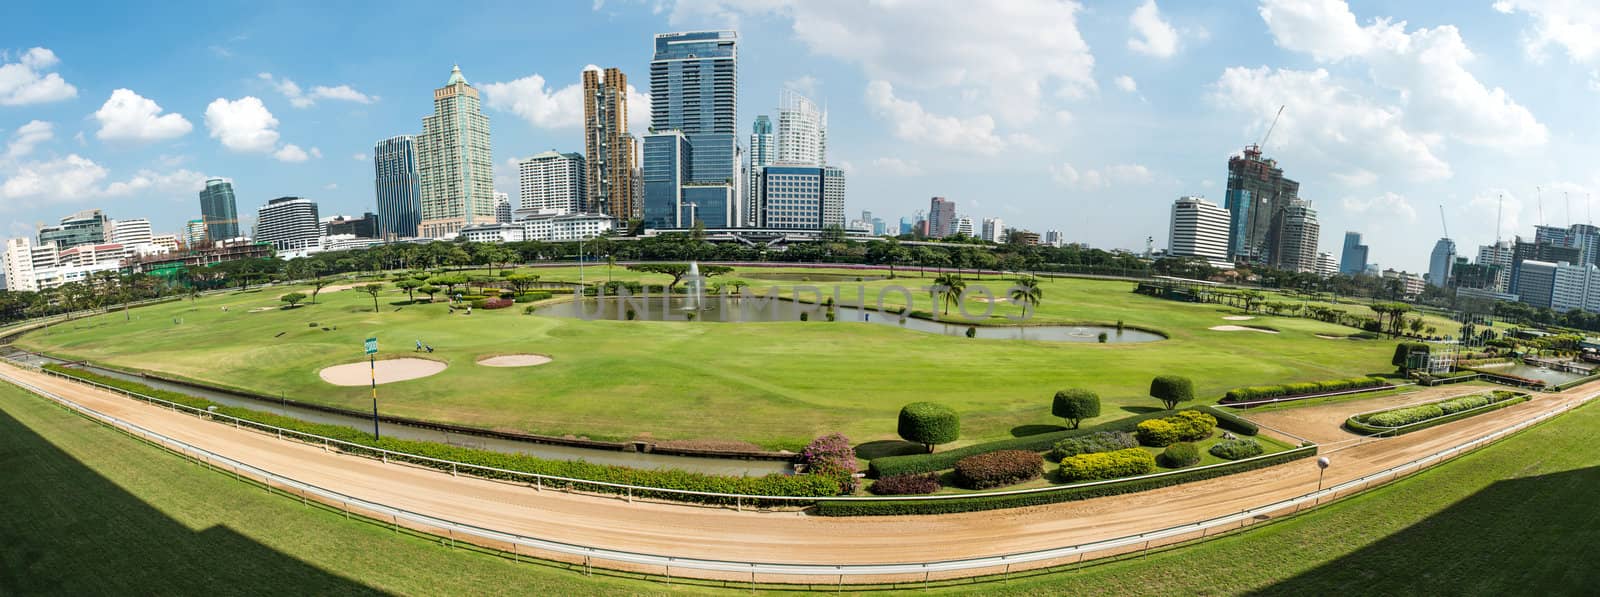 Golf course in the city of Bangkok taken in panoramic technic by sasilsolutions